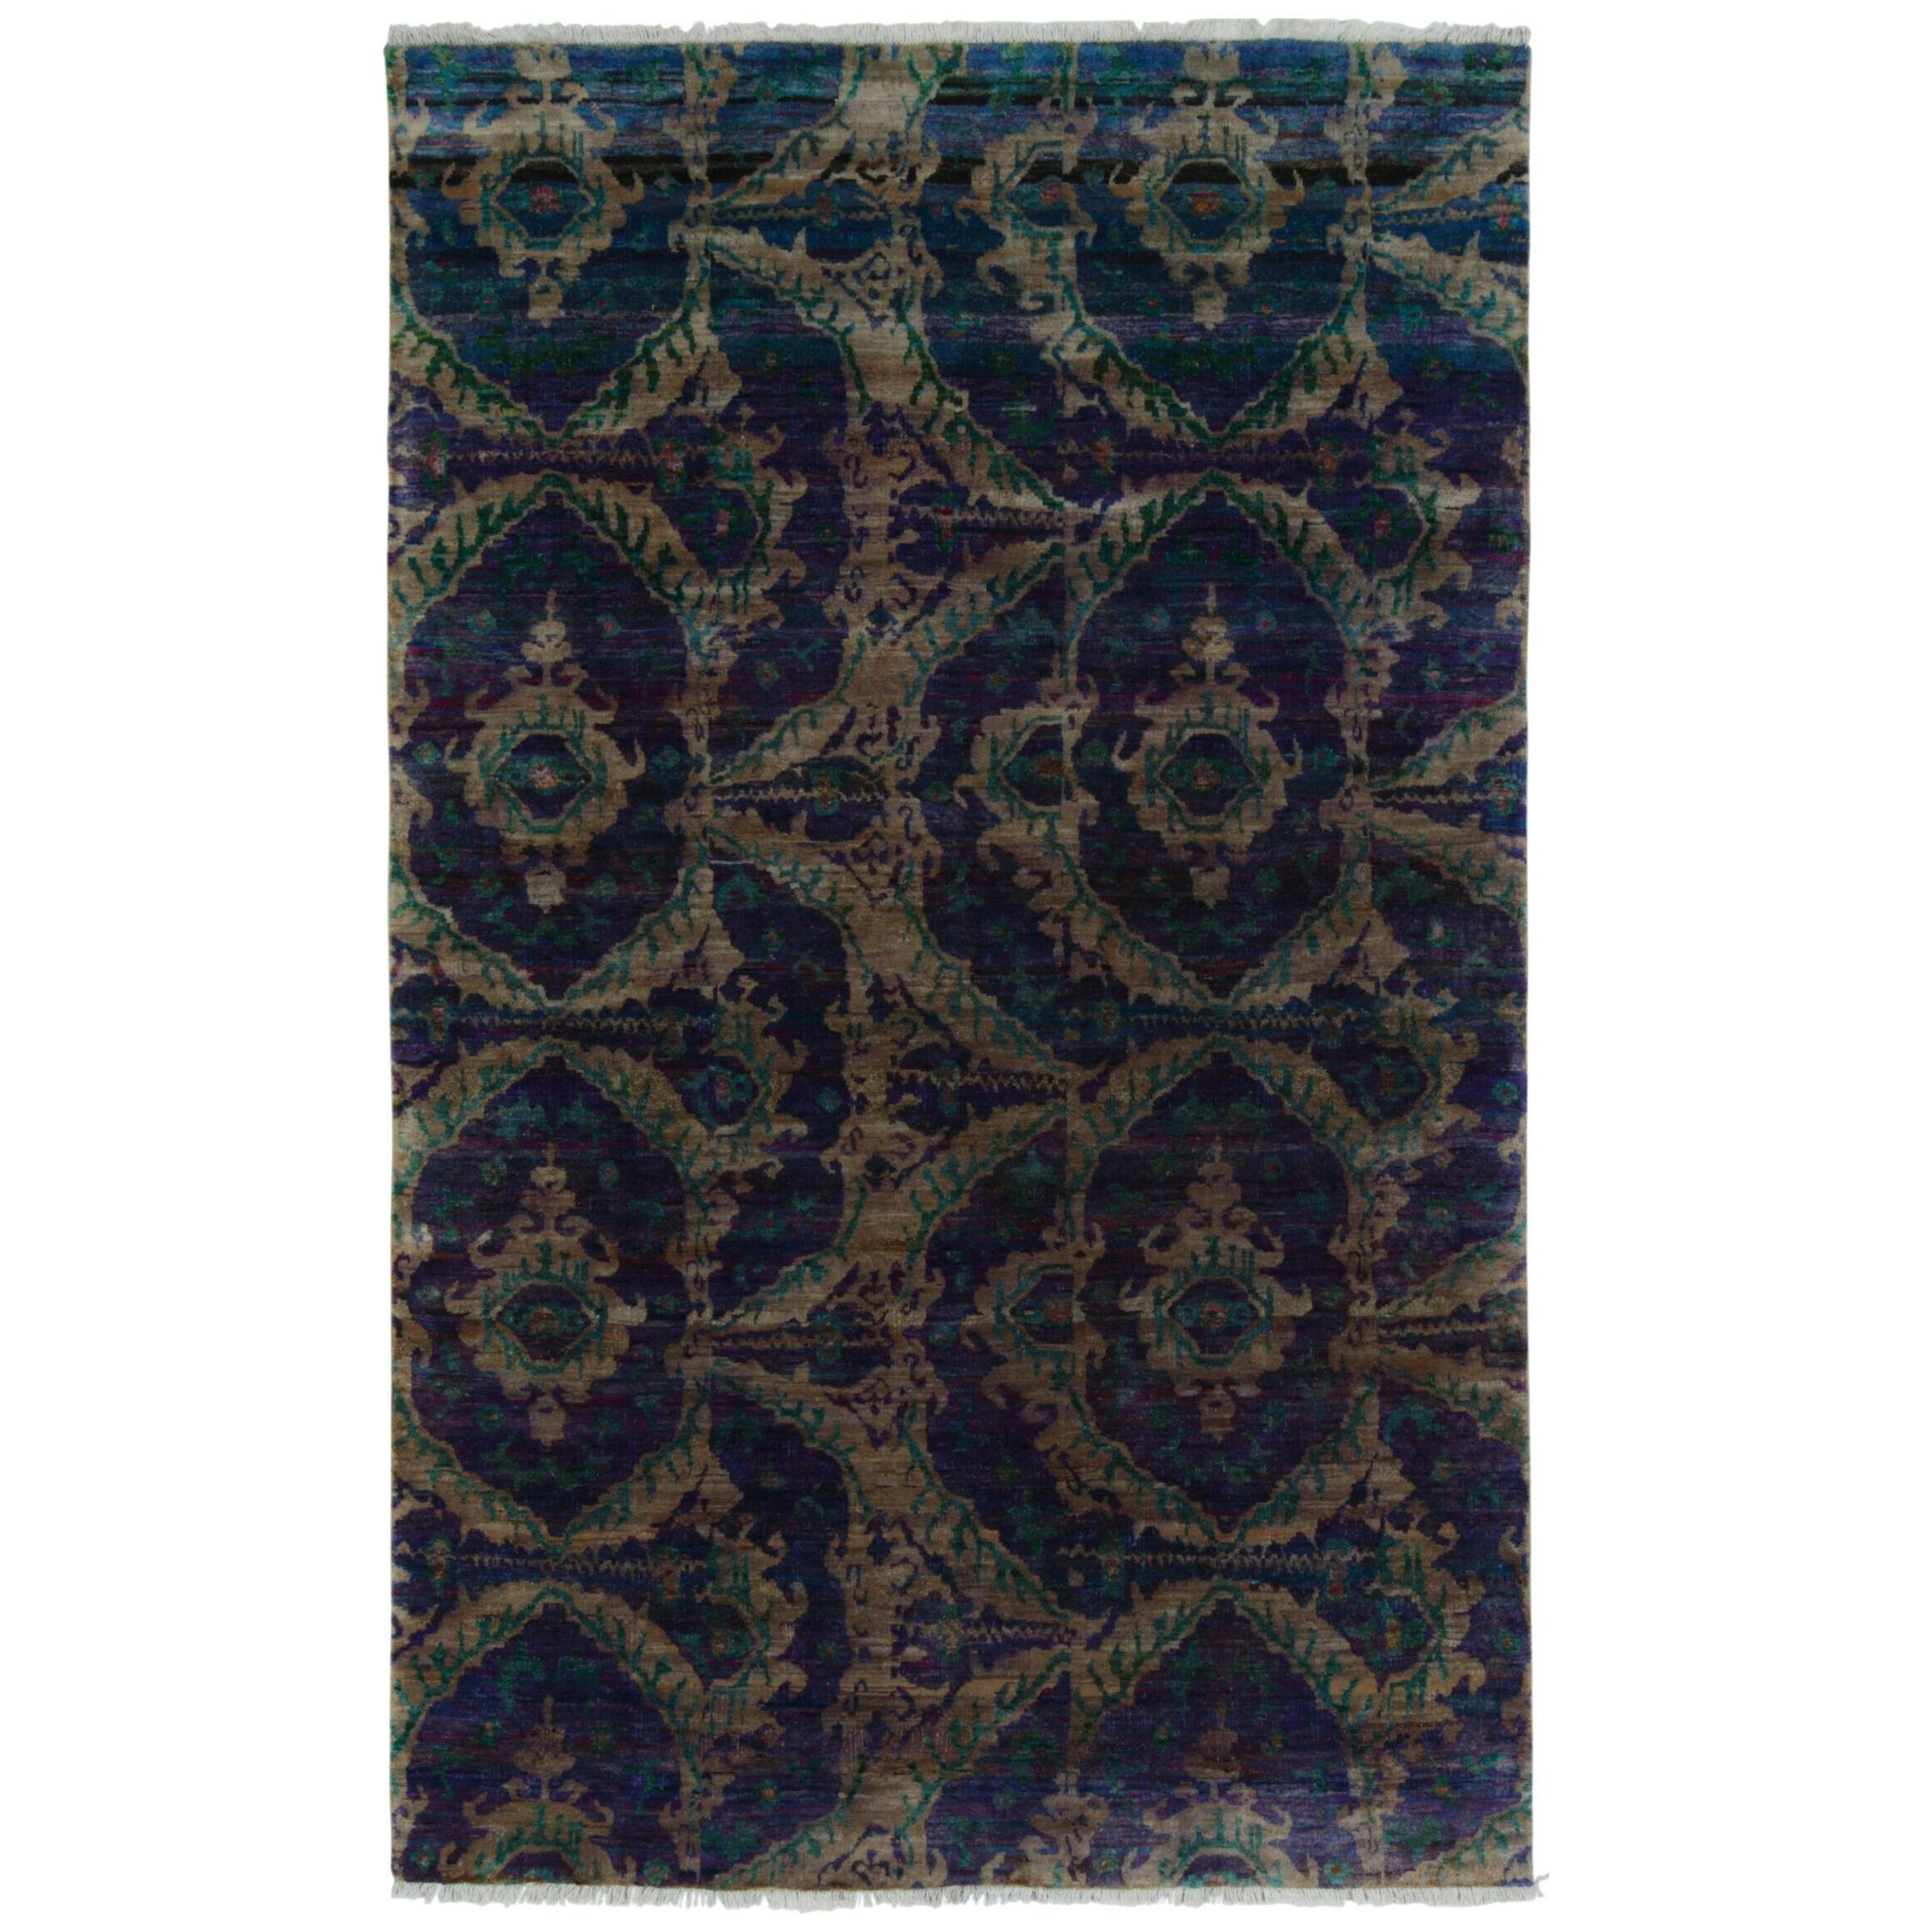 Rug & Kilim’s Tabriz Style Rug in Blue With Green and Brown Ikats Patterns